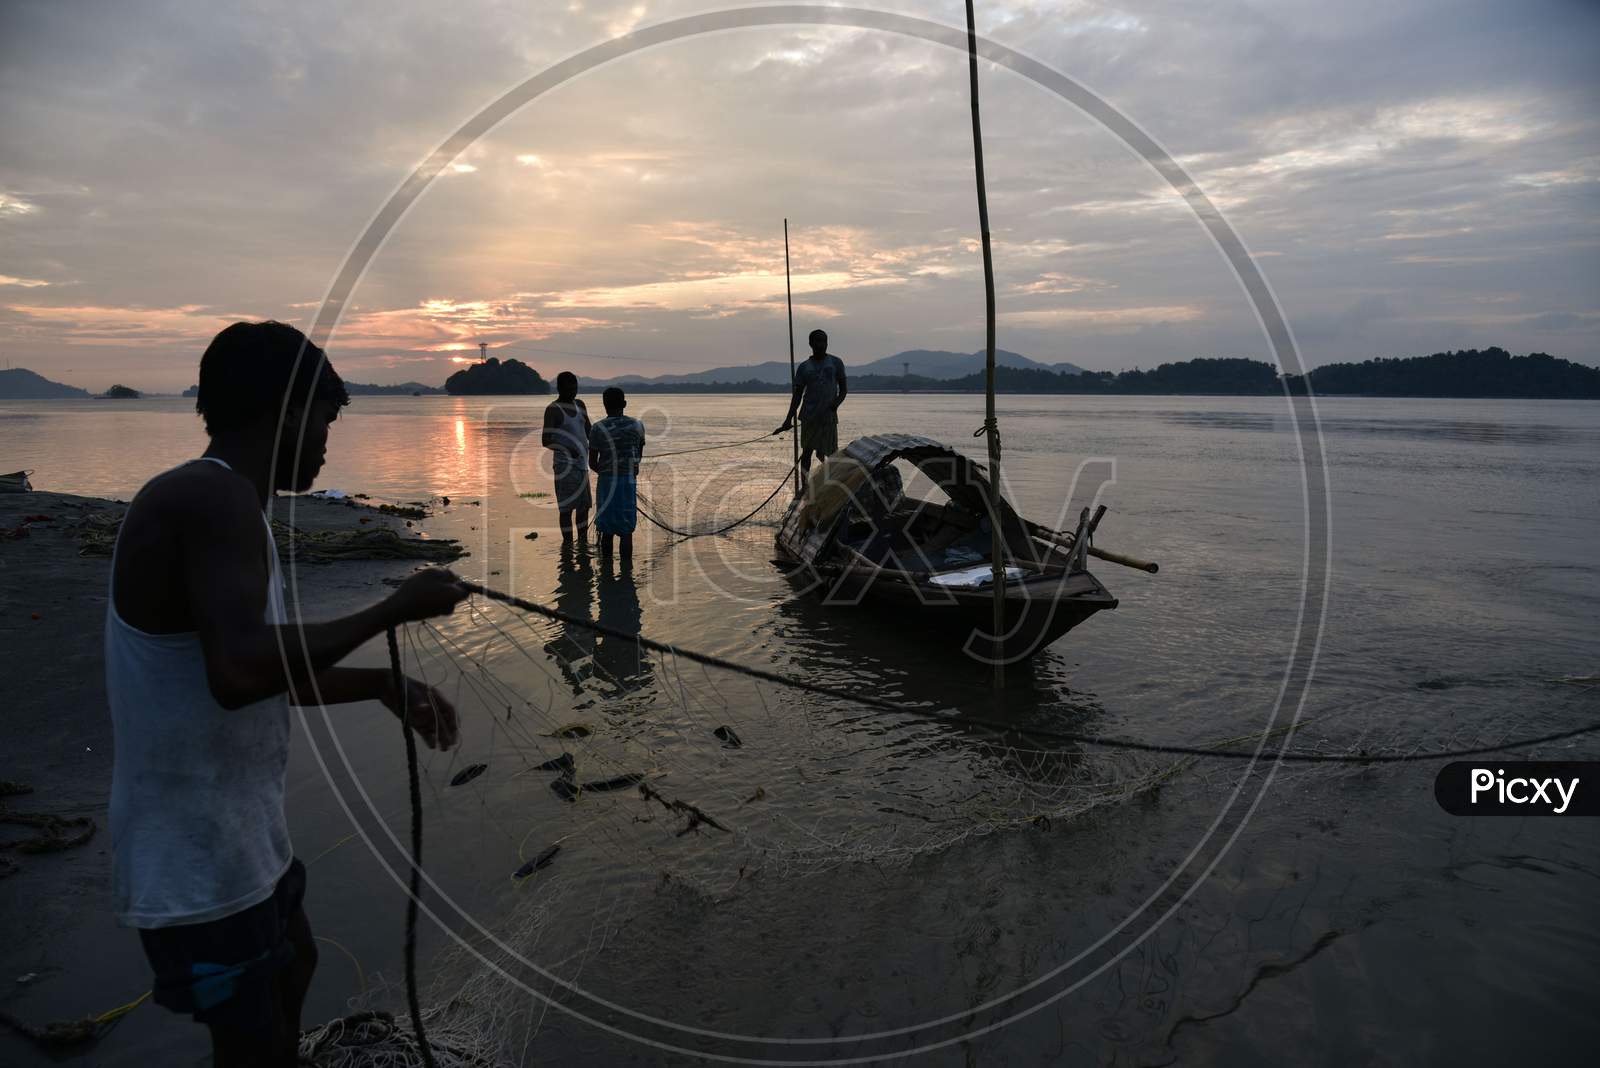 Fishermen Cleaning Their Fishing Nets After Fish In The Brahmaputra River, In Guwahati, Assam